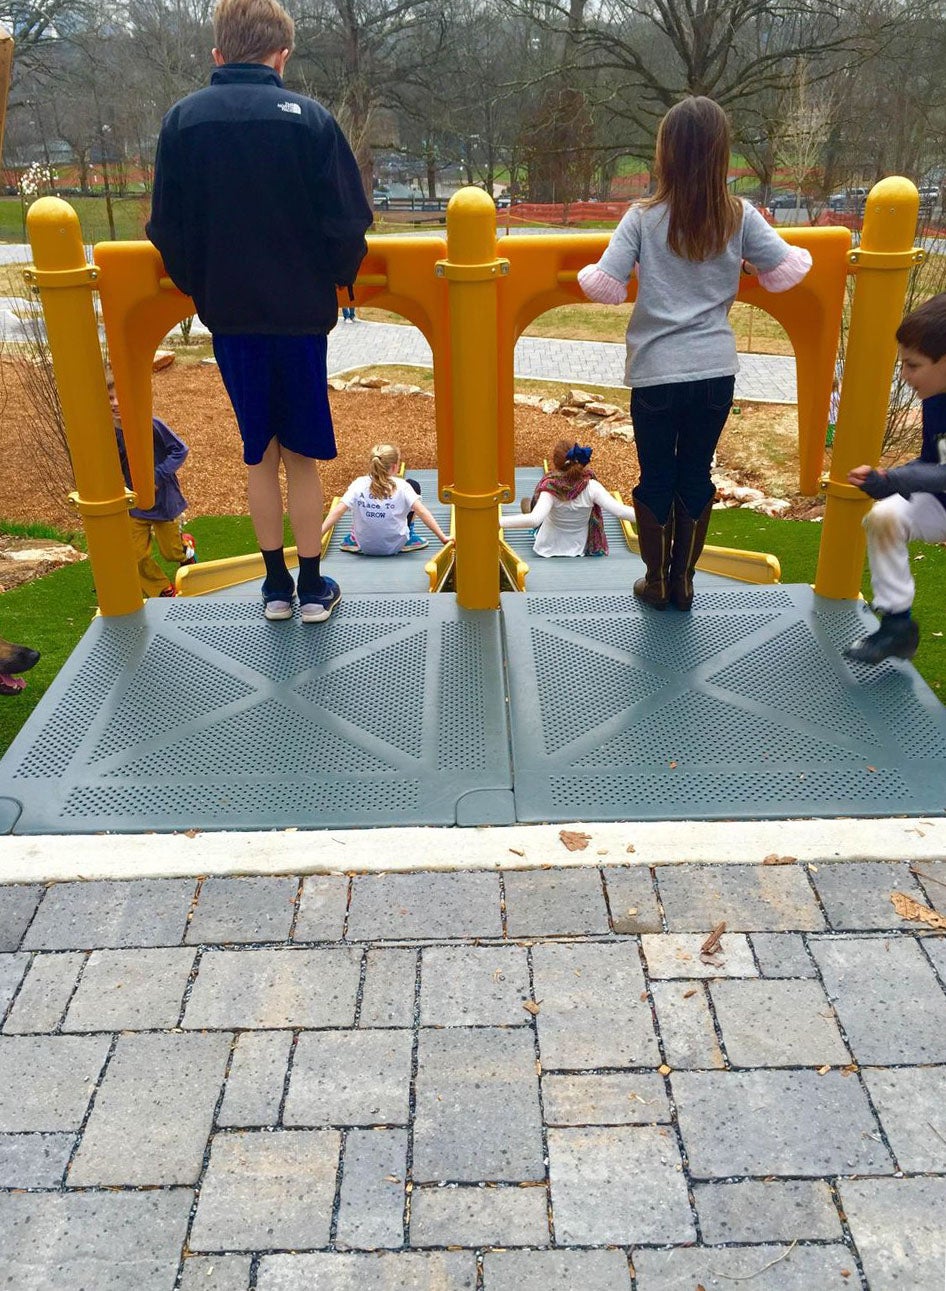 Urbana Stone® permeable pavers throughout the playground manage stormwater, reducing water runoff and reducing pollution. (photo: Chastain Park Conservancy)